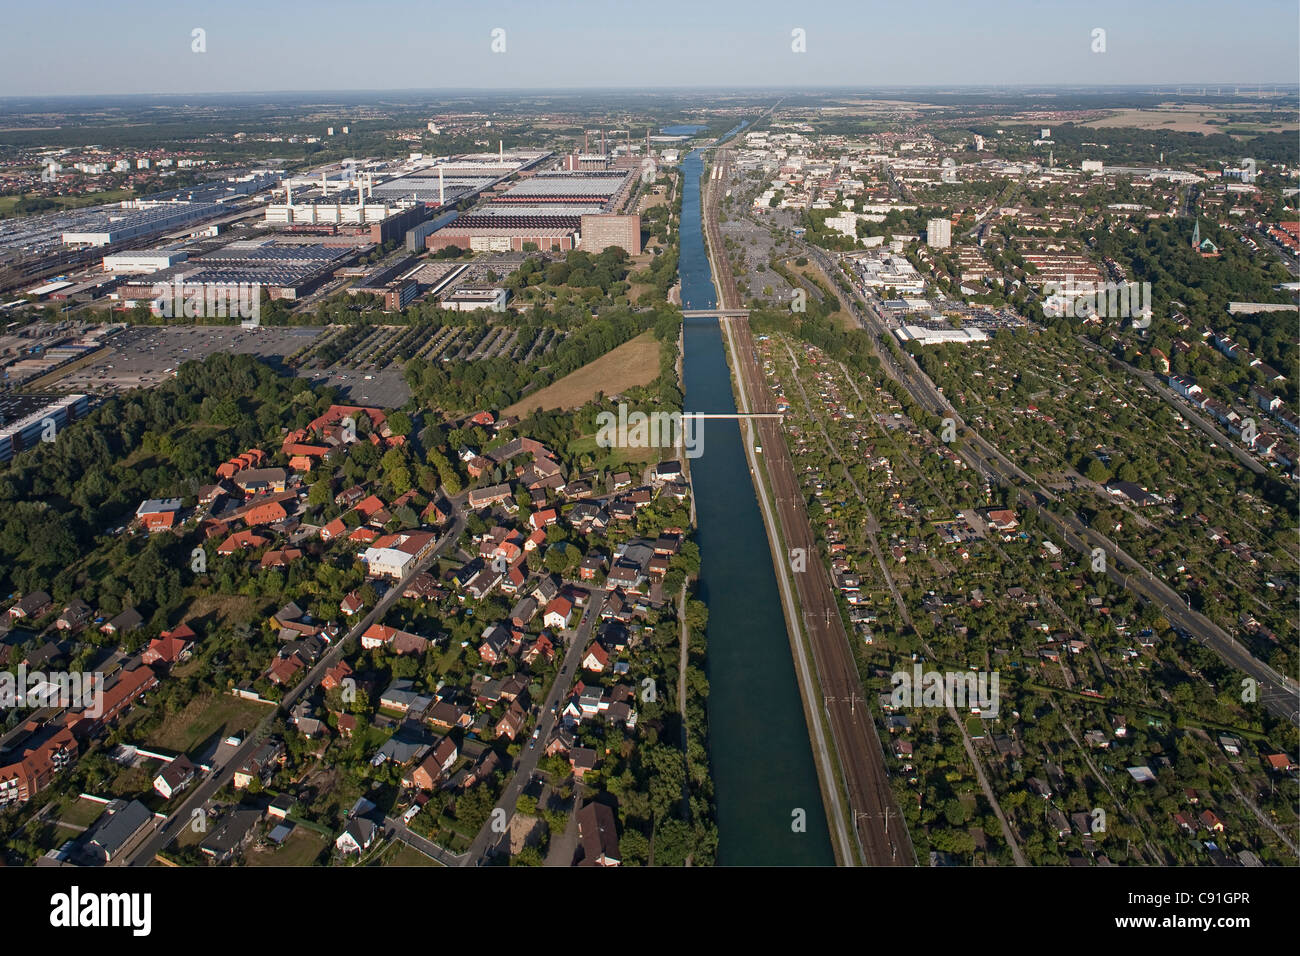 Aerial view of Volkswagen Autostadt, Canal and surrounding area, Wolfsburg, Lower Saxony, Germany Stock Photo